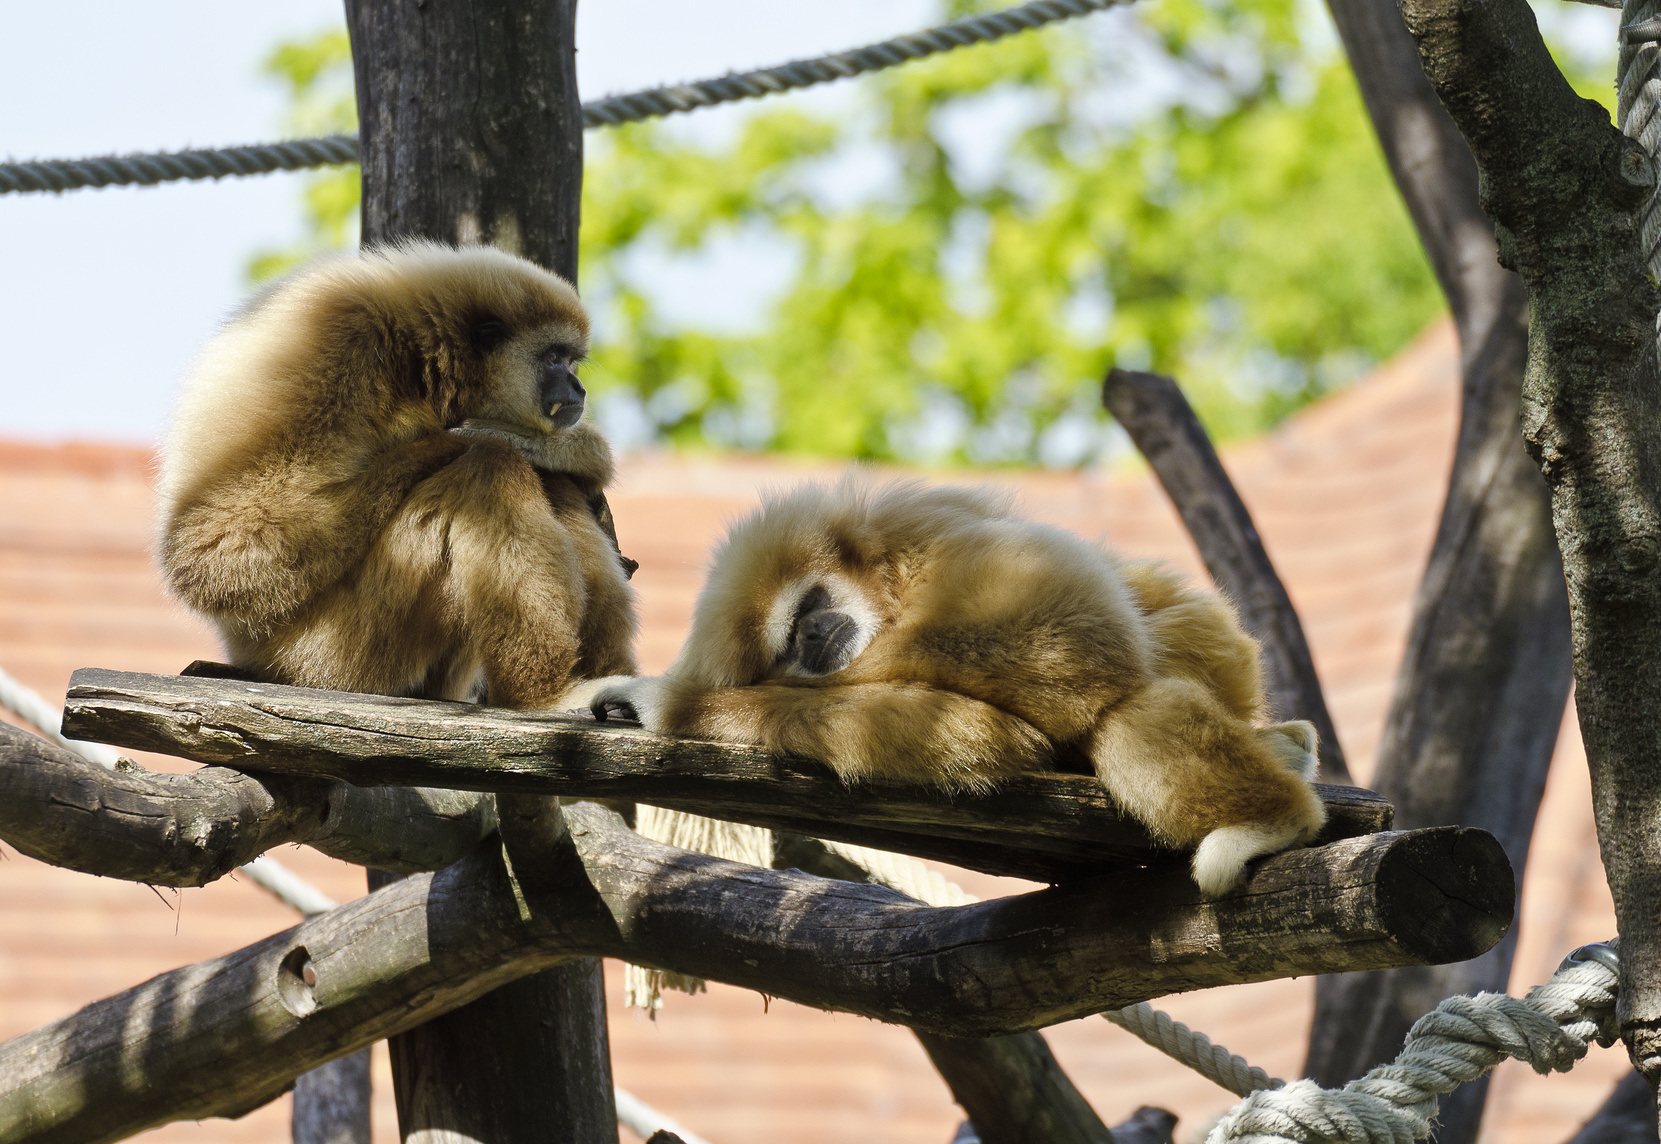 Two gibbons